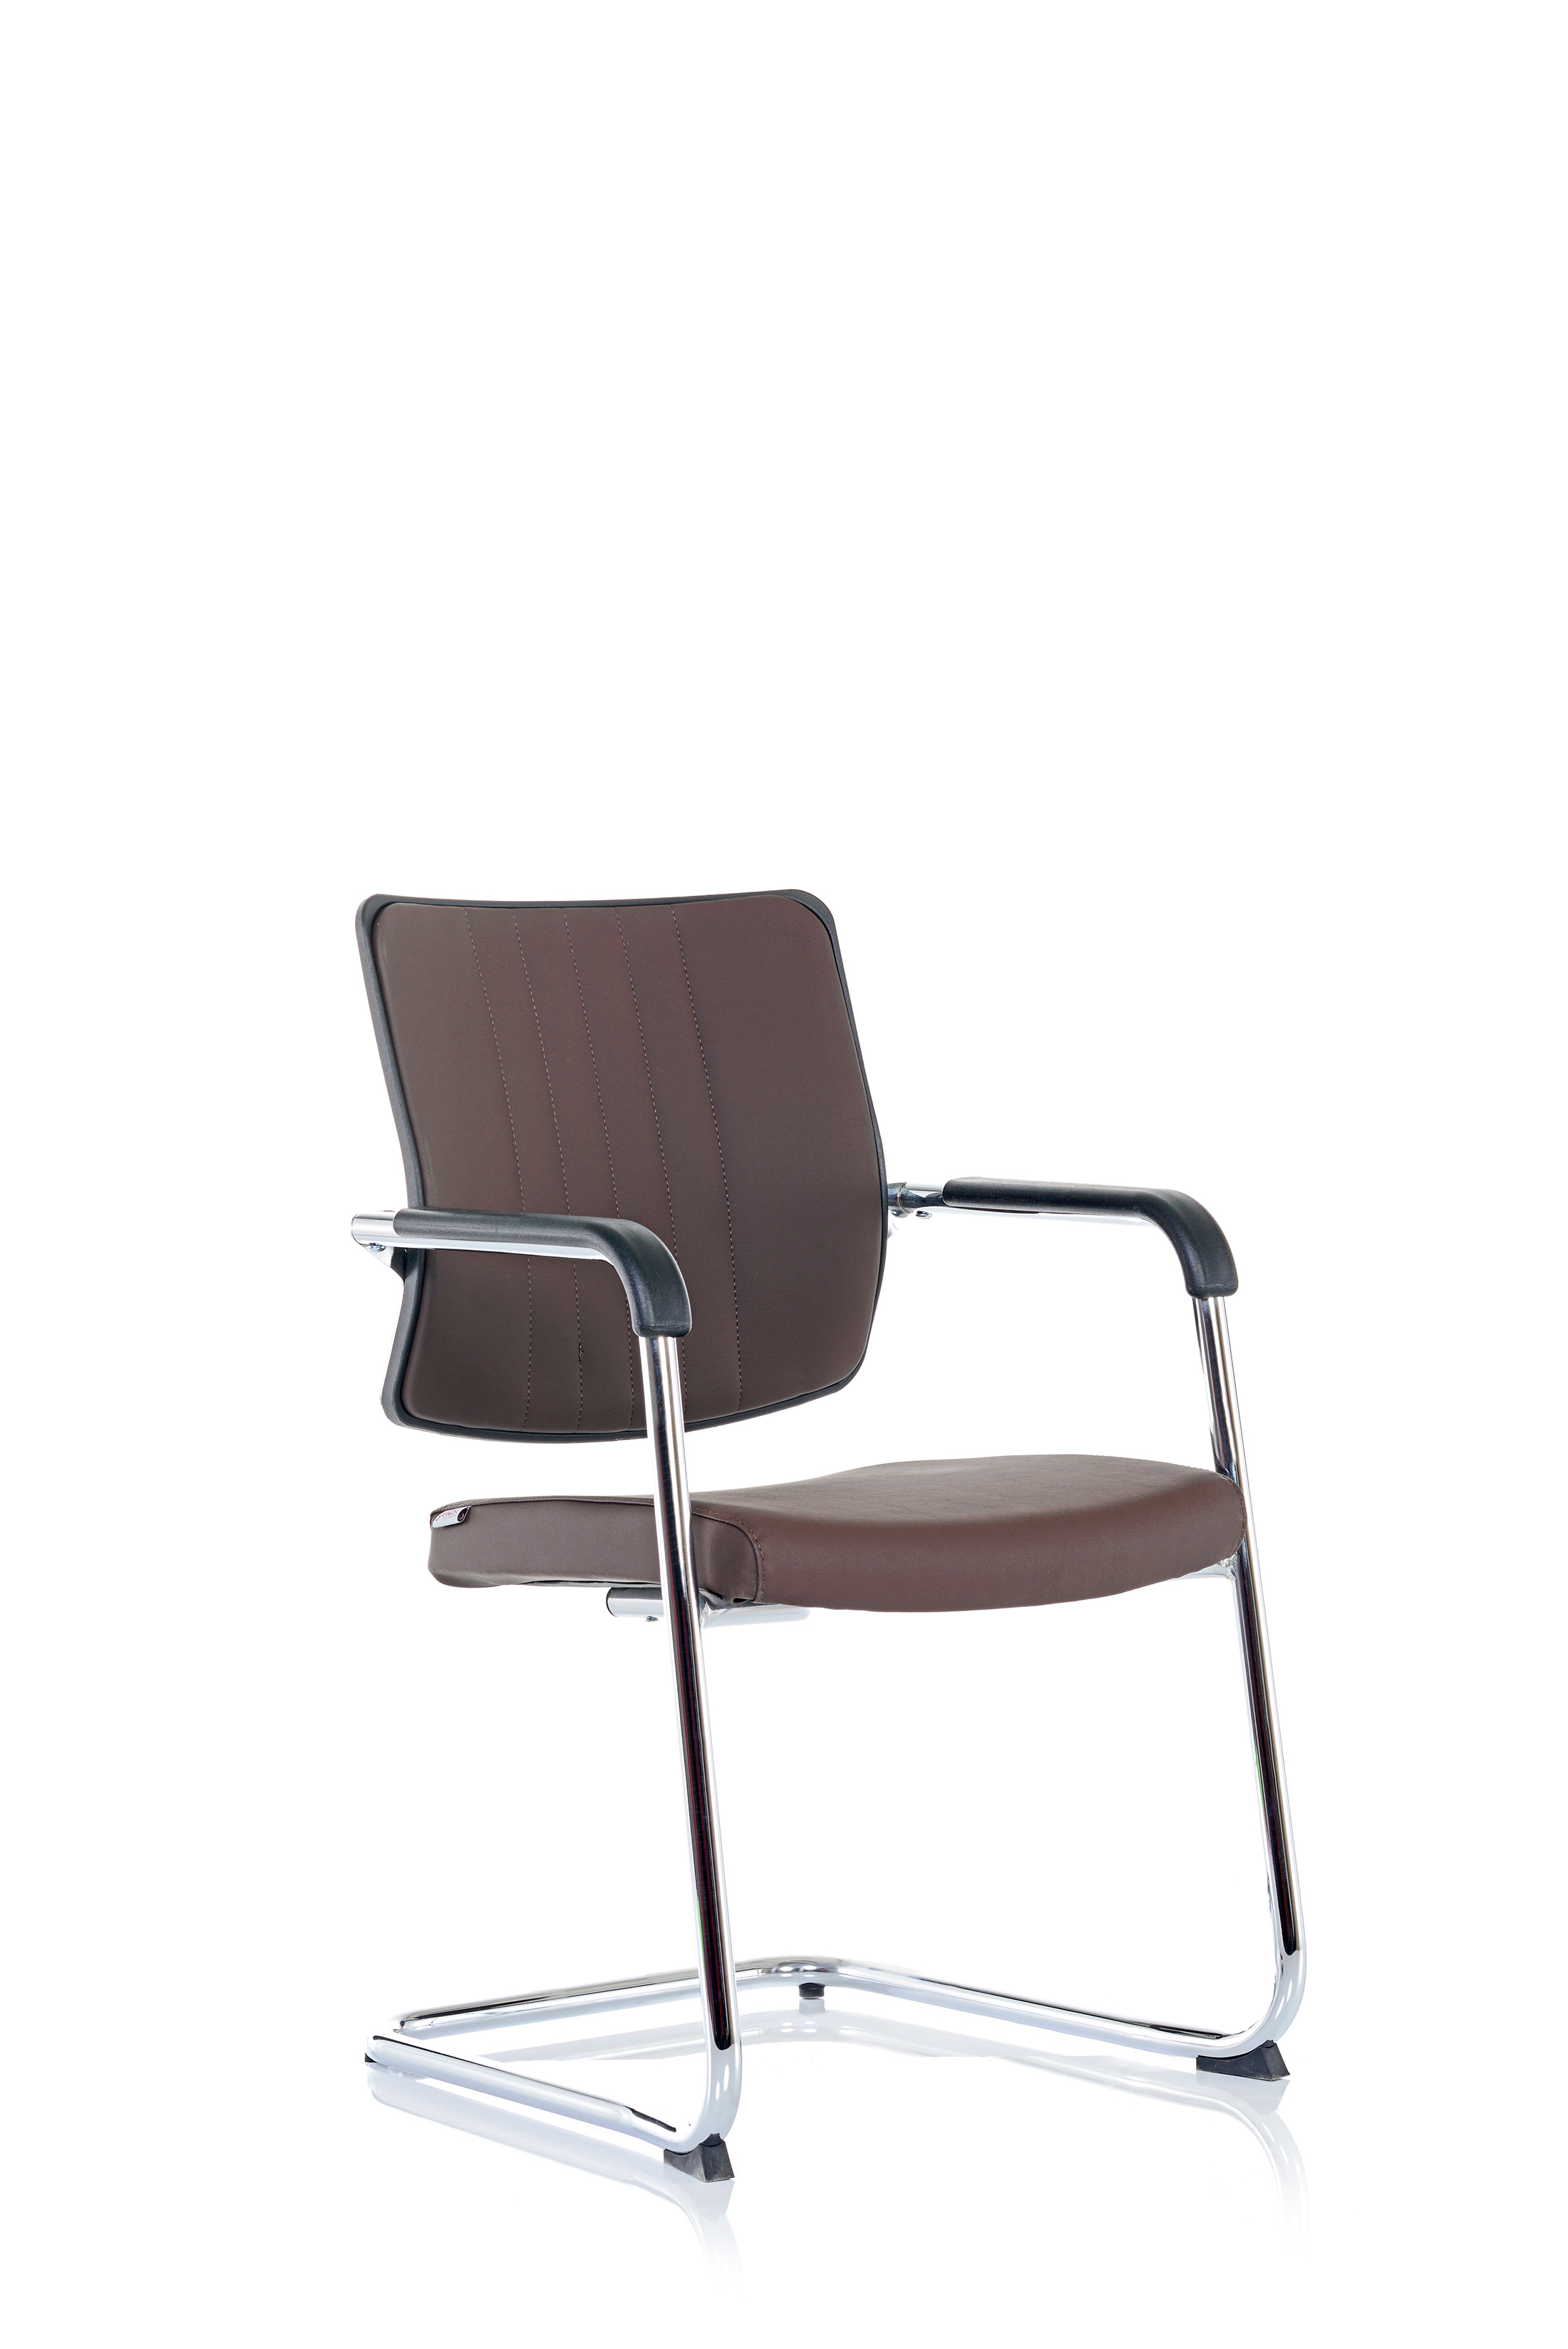 TUNIS 300C VISITOR CHAIR